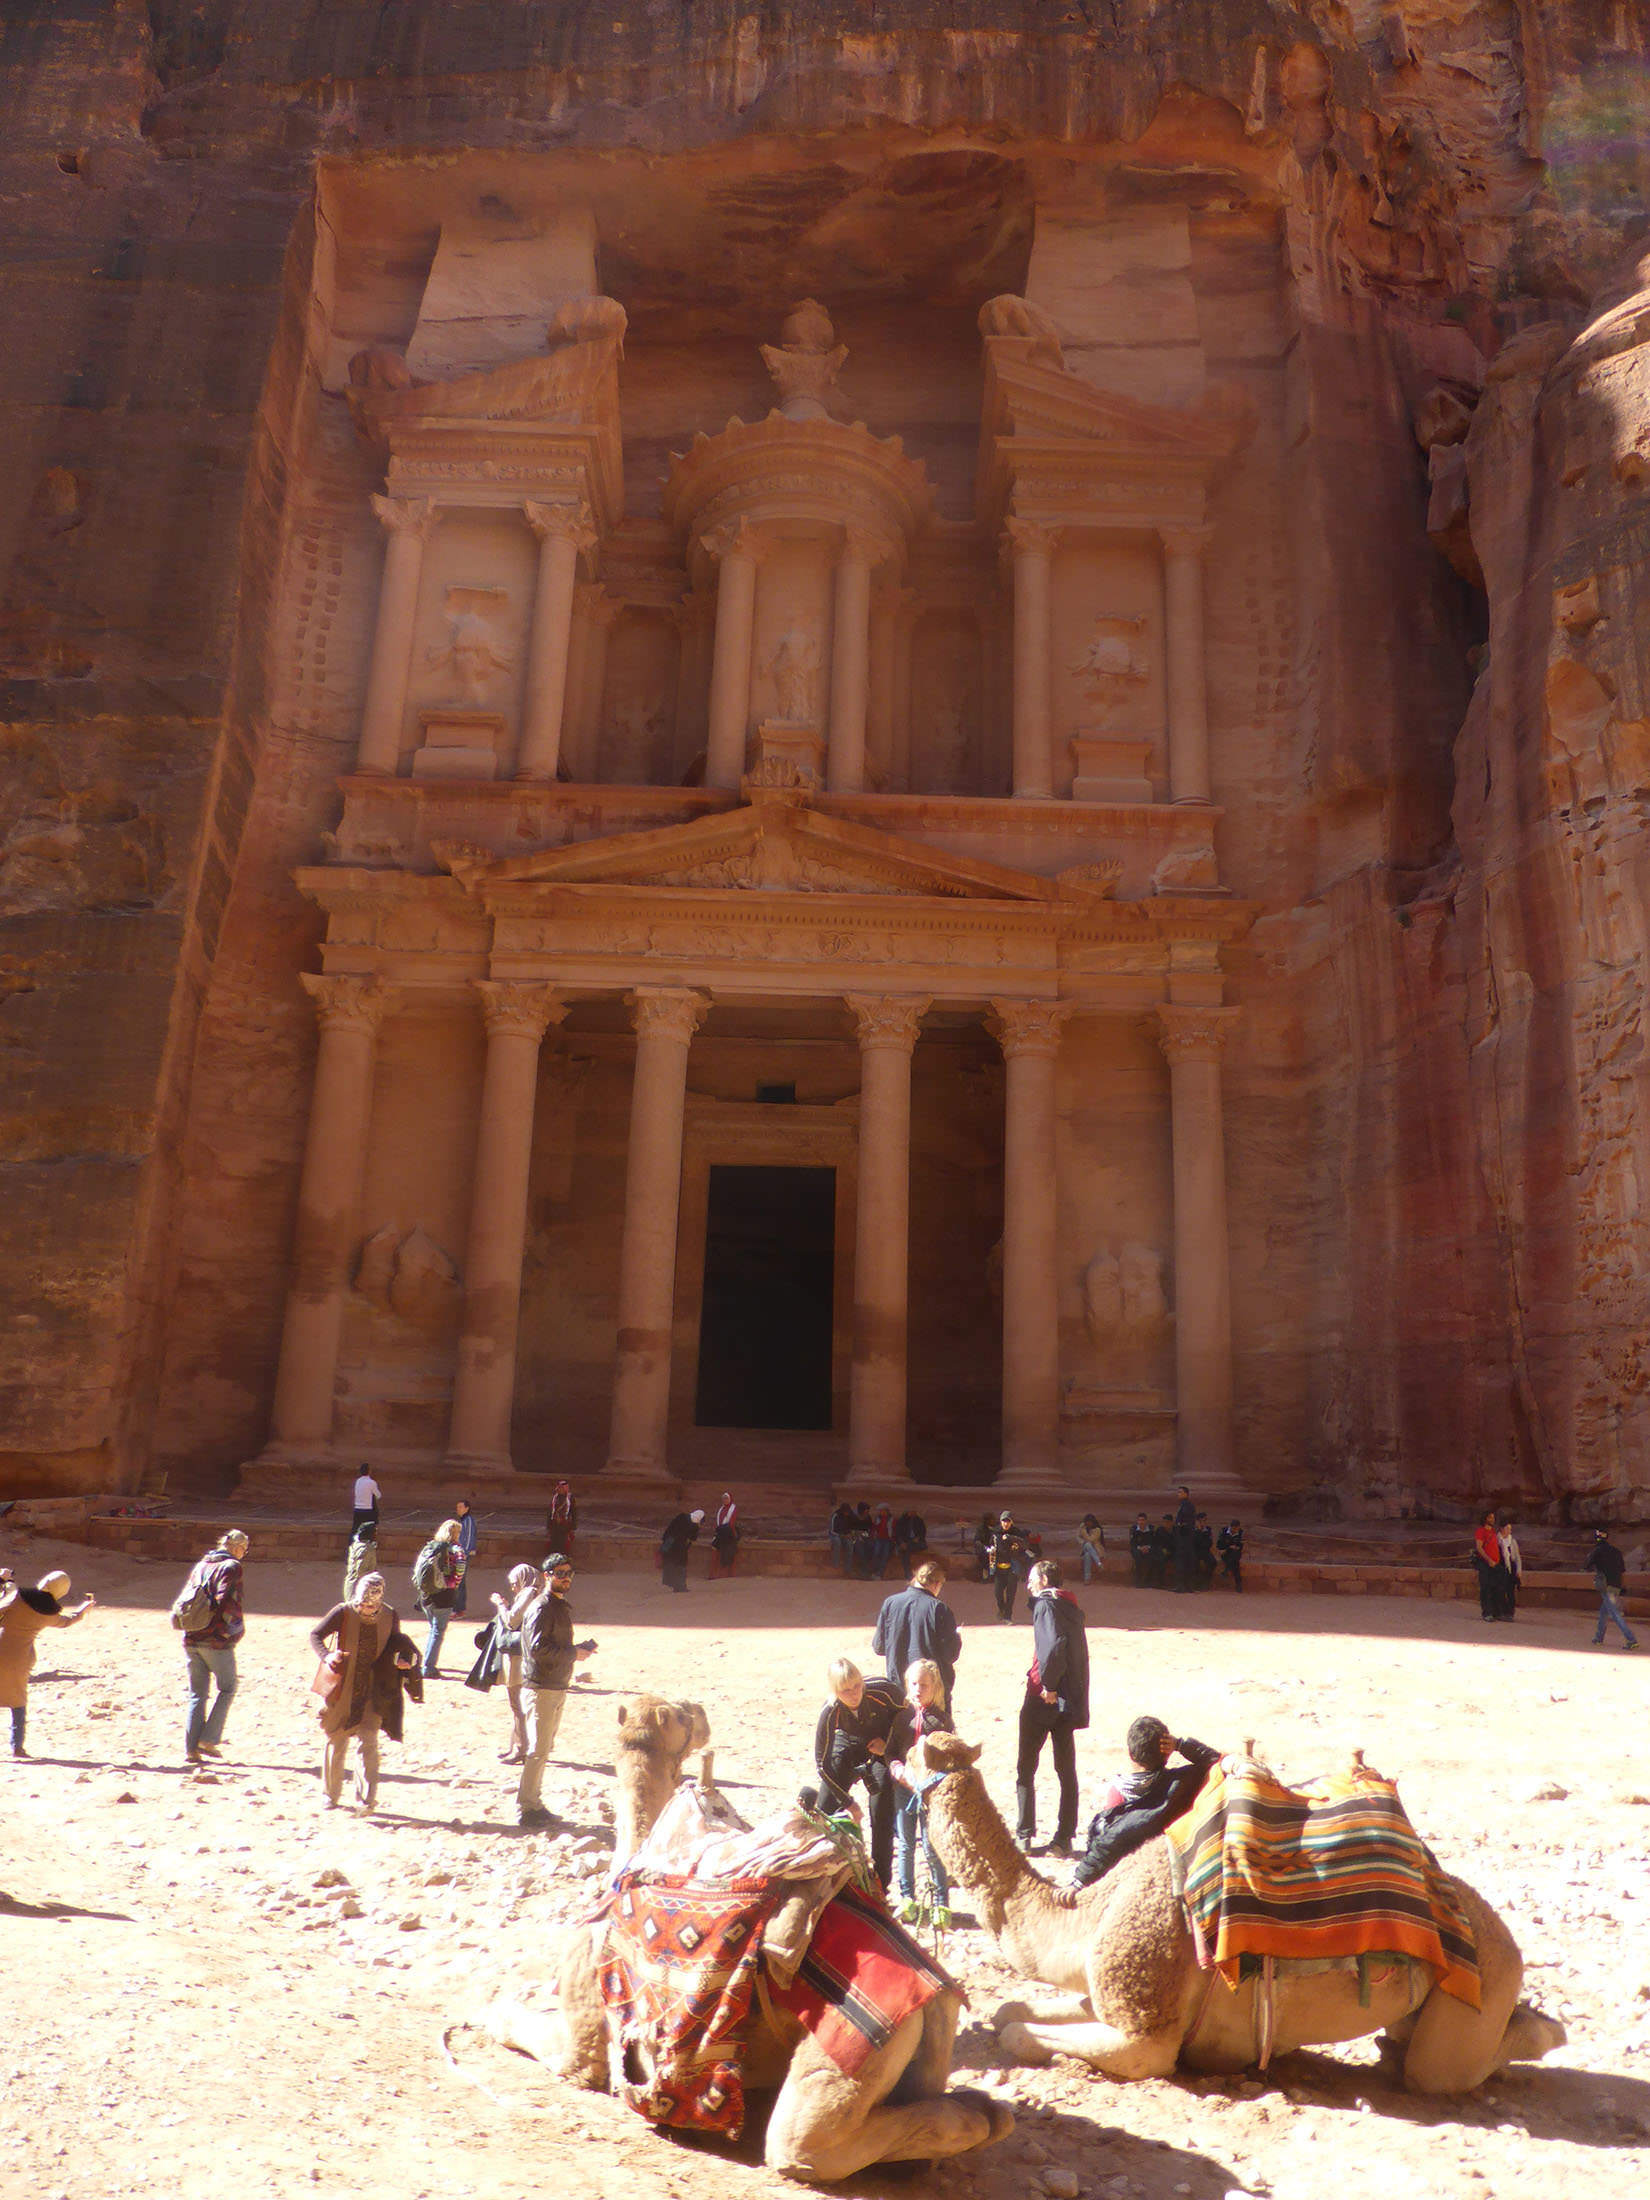 Camels sitting in the sun outside the Treasury of Petra Jordan